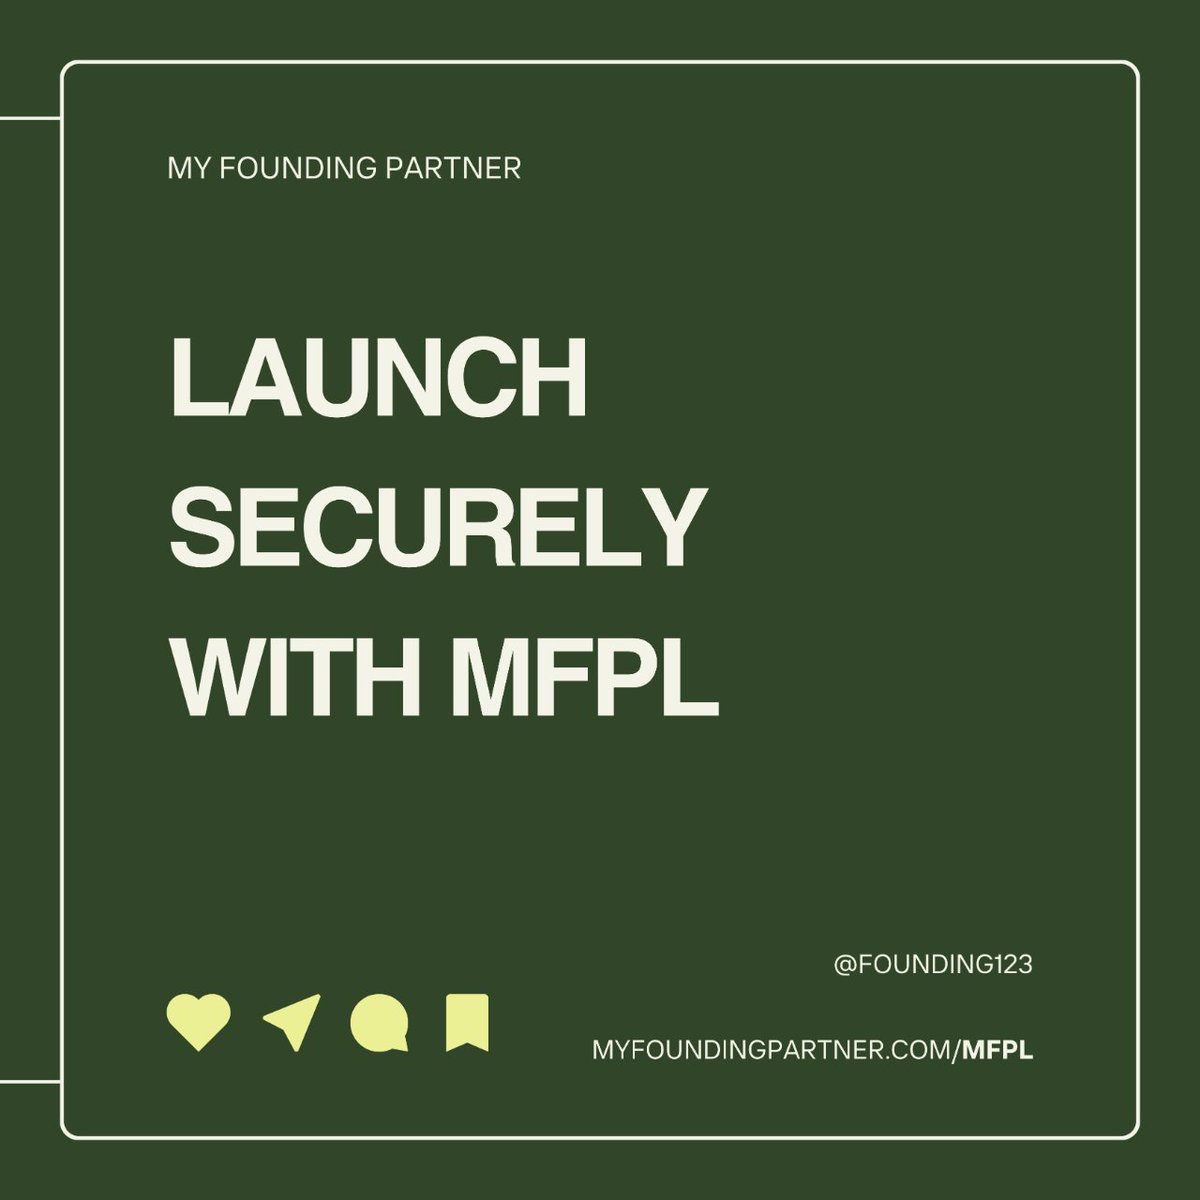 Kickstart your startup legally with MFPL.

Navigate business structures and compliance. 🚀

#Entrepreneurship #BusinessLaw #MFP #BeAFounder